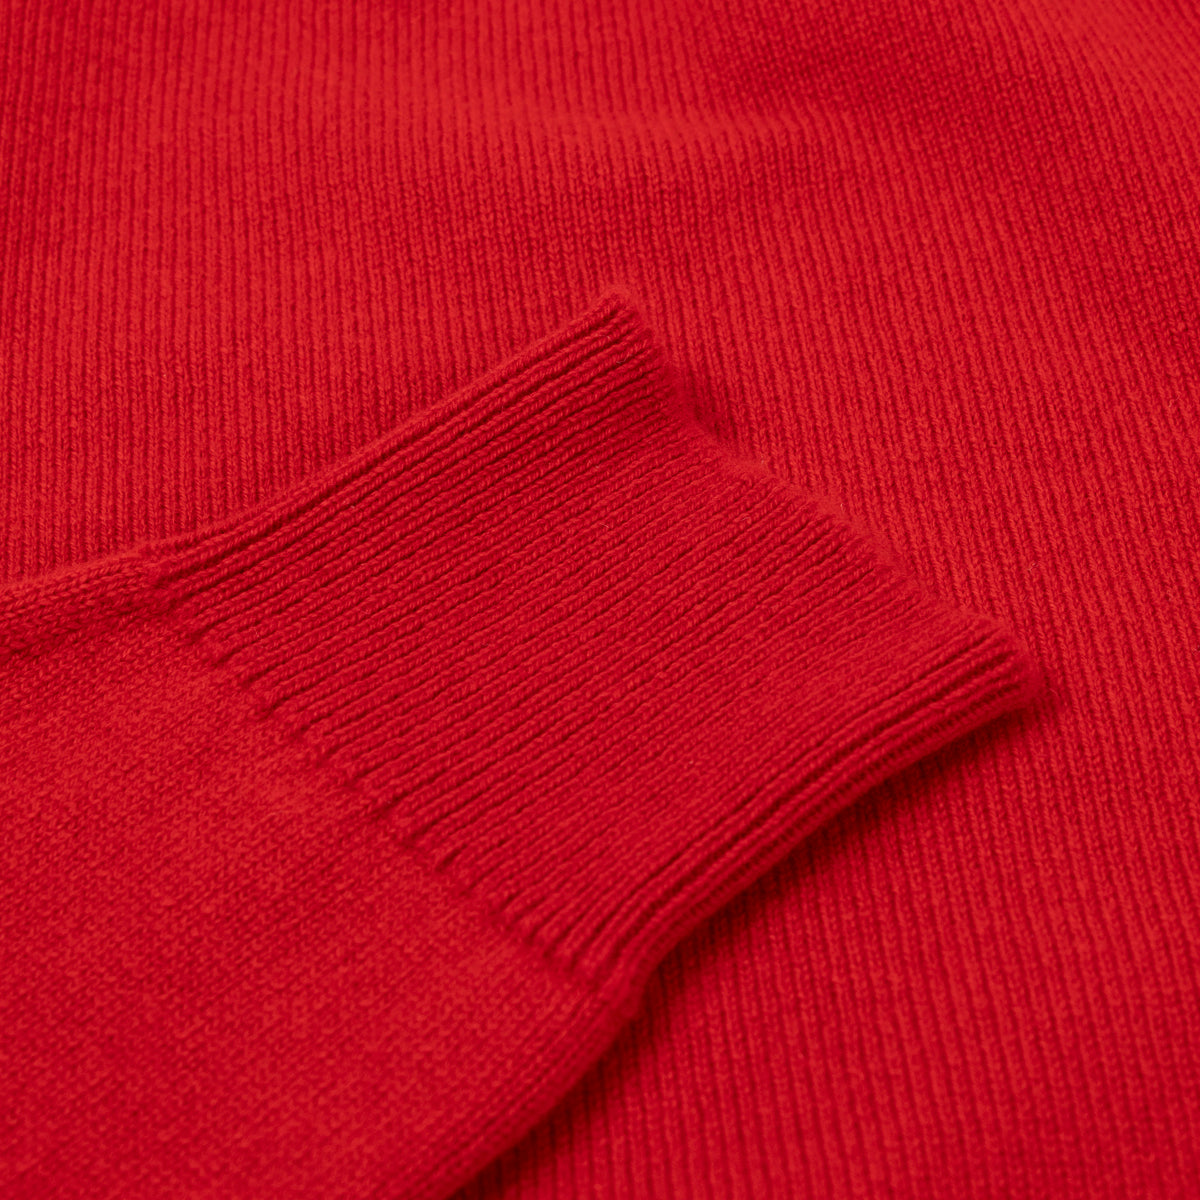 Ruby Red Tiree 4ply Crew Neck Cashmere Sweater  Robert Old   